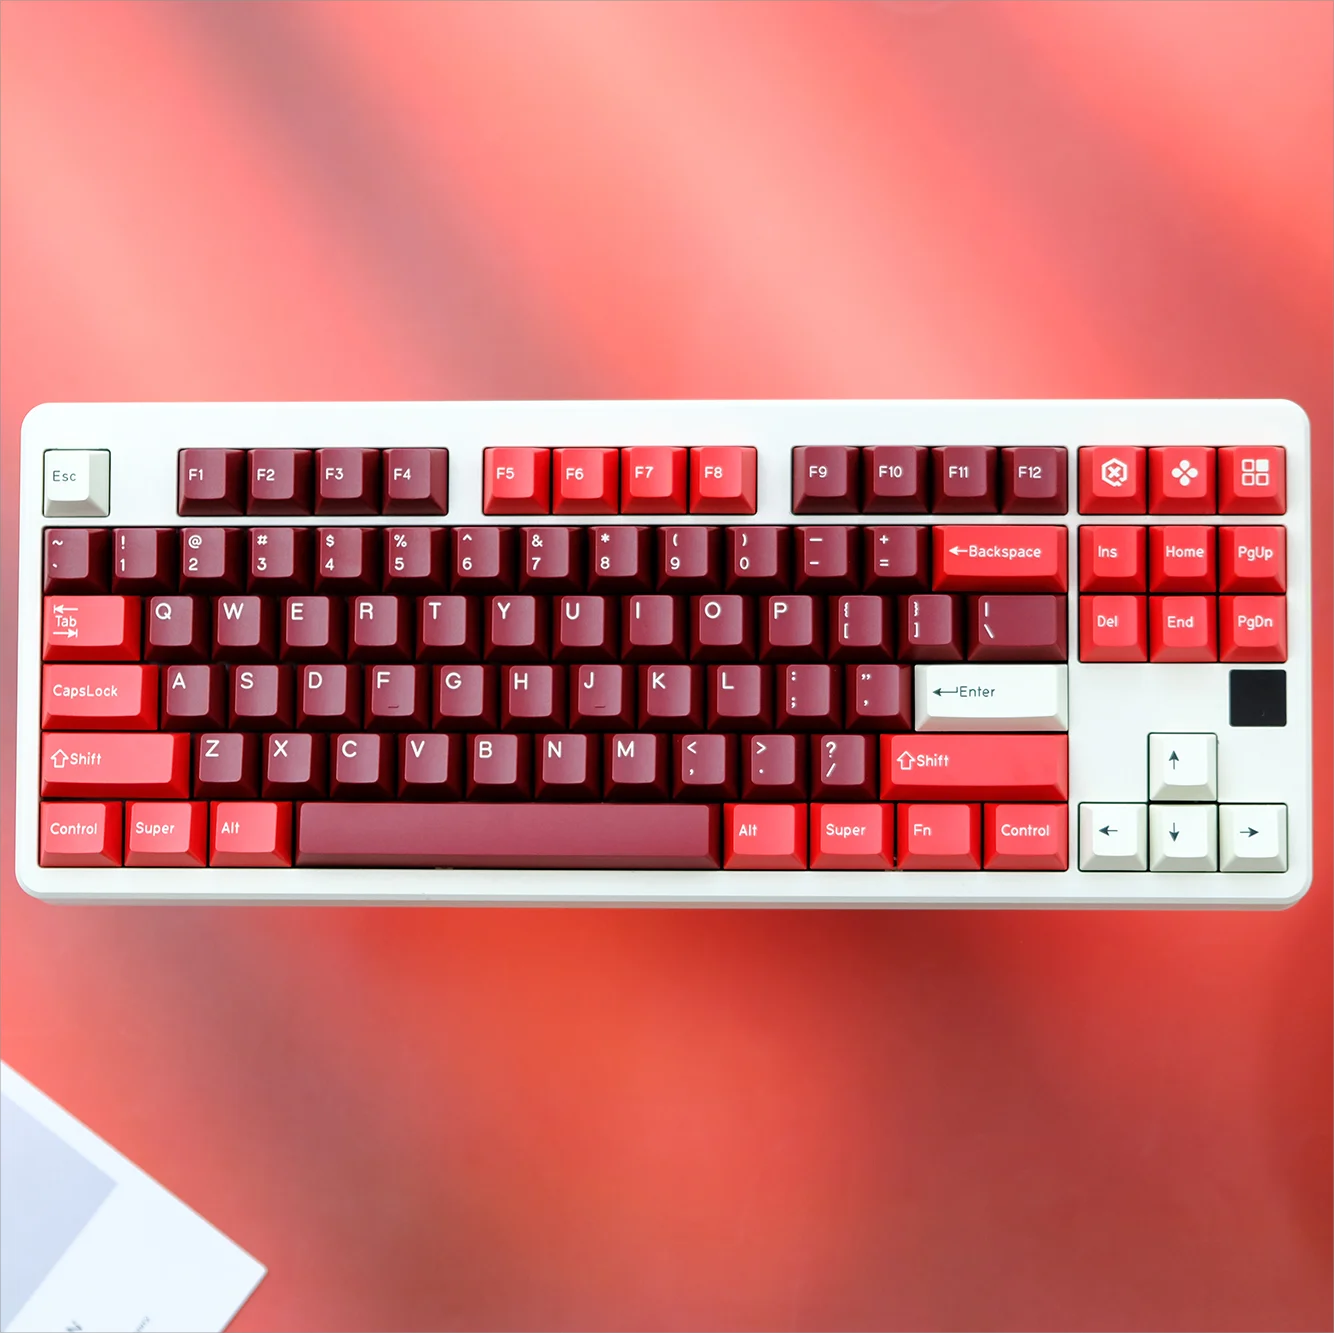 

170+ Keys QX GMK Jamon Keycaps PBT Double Shot Cherry Profile Red for 61 64 68 74 87 96 980 100 layout Mechanical Keyboard